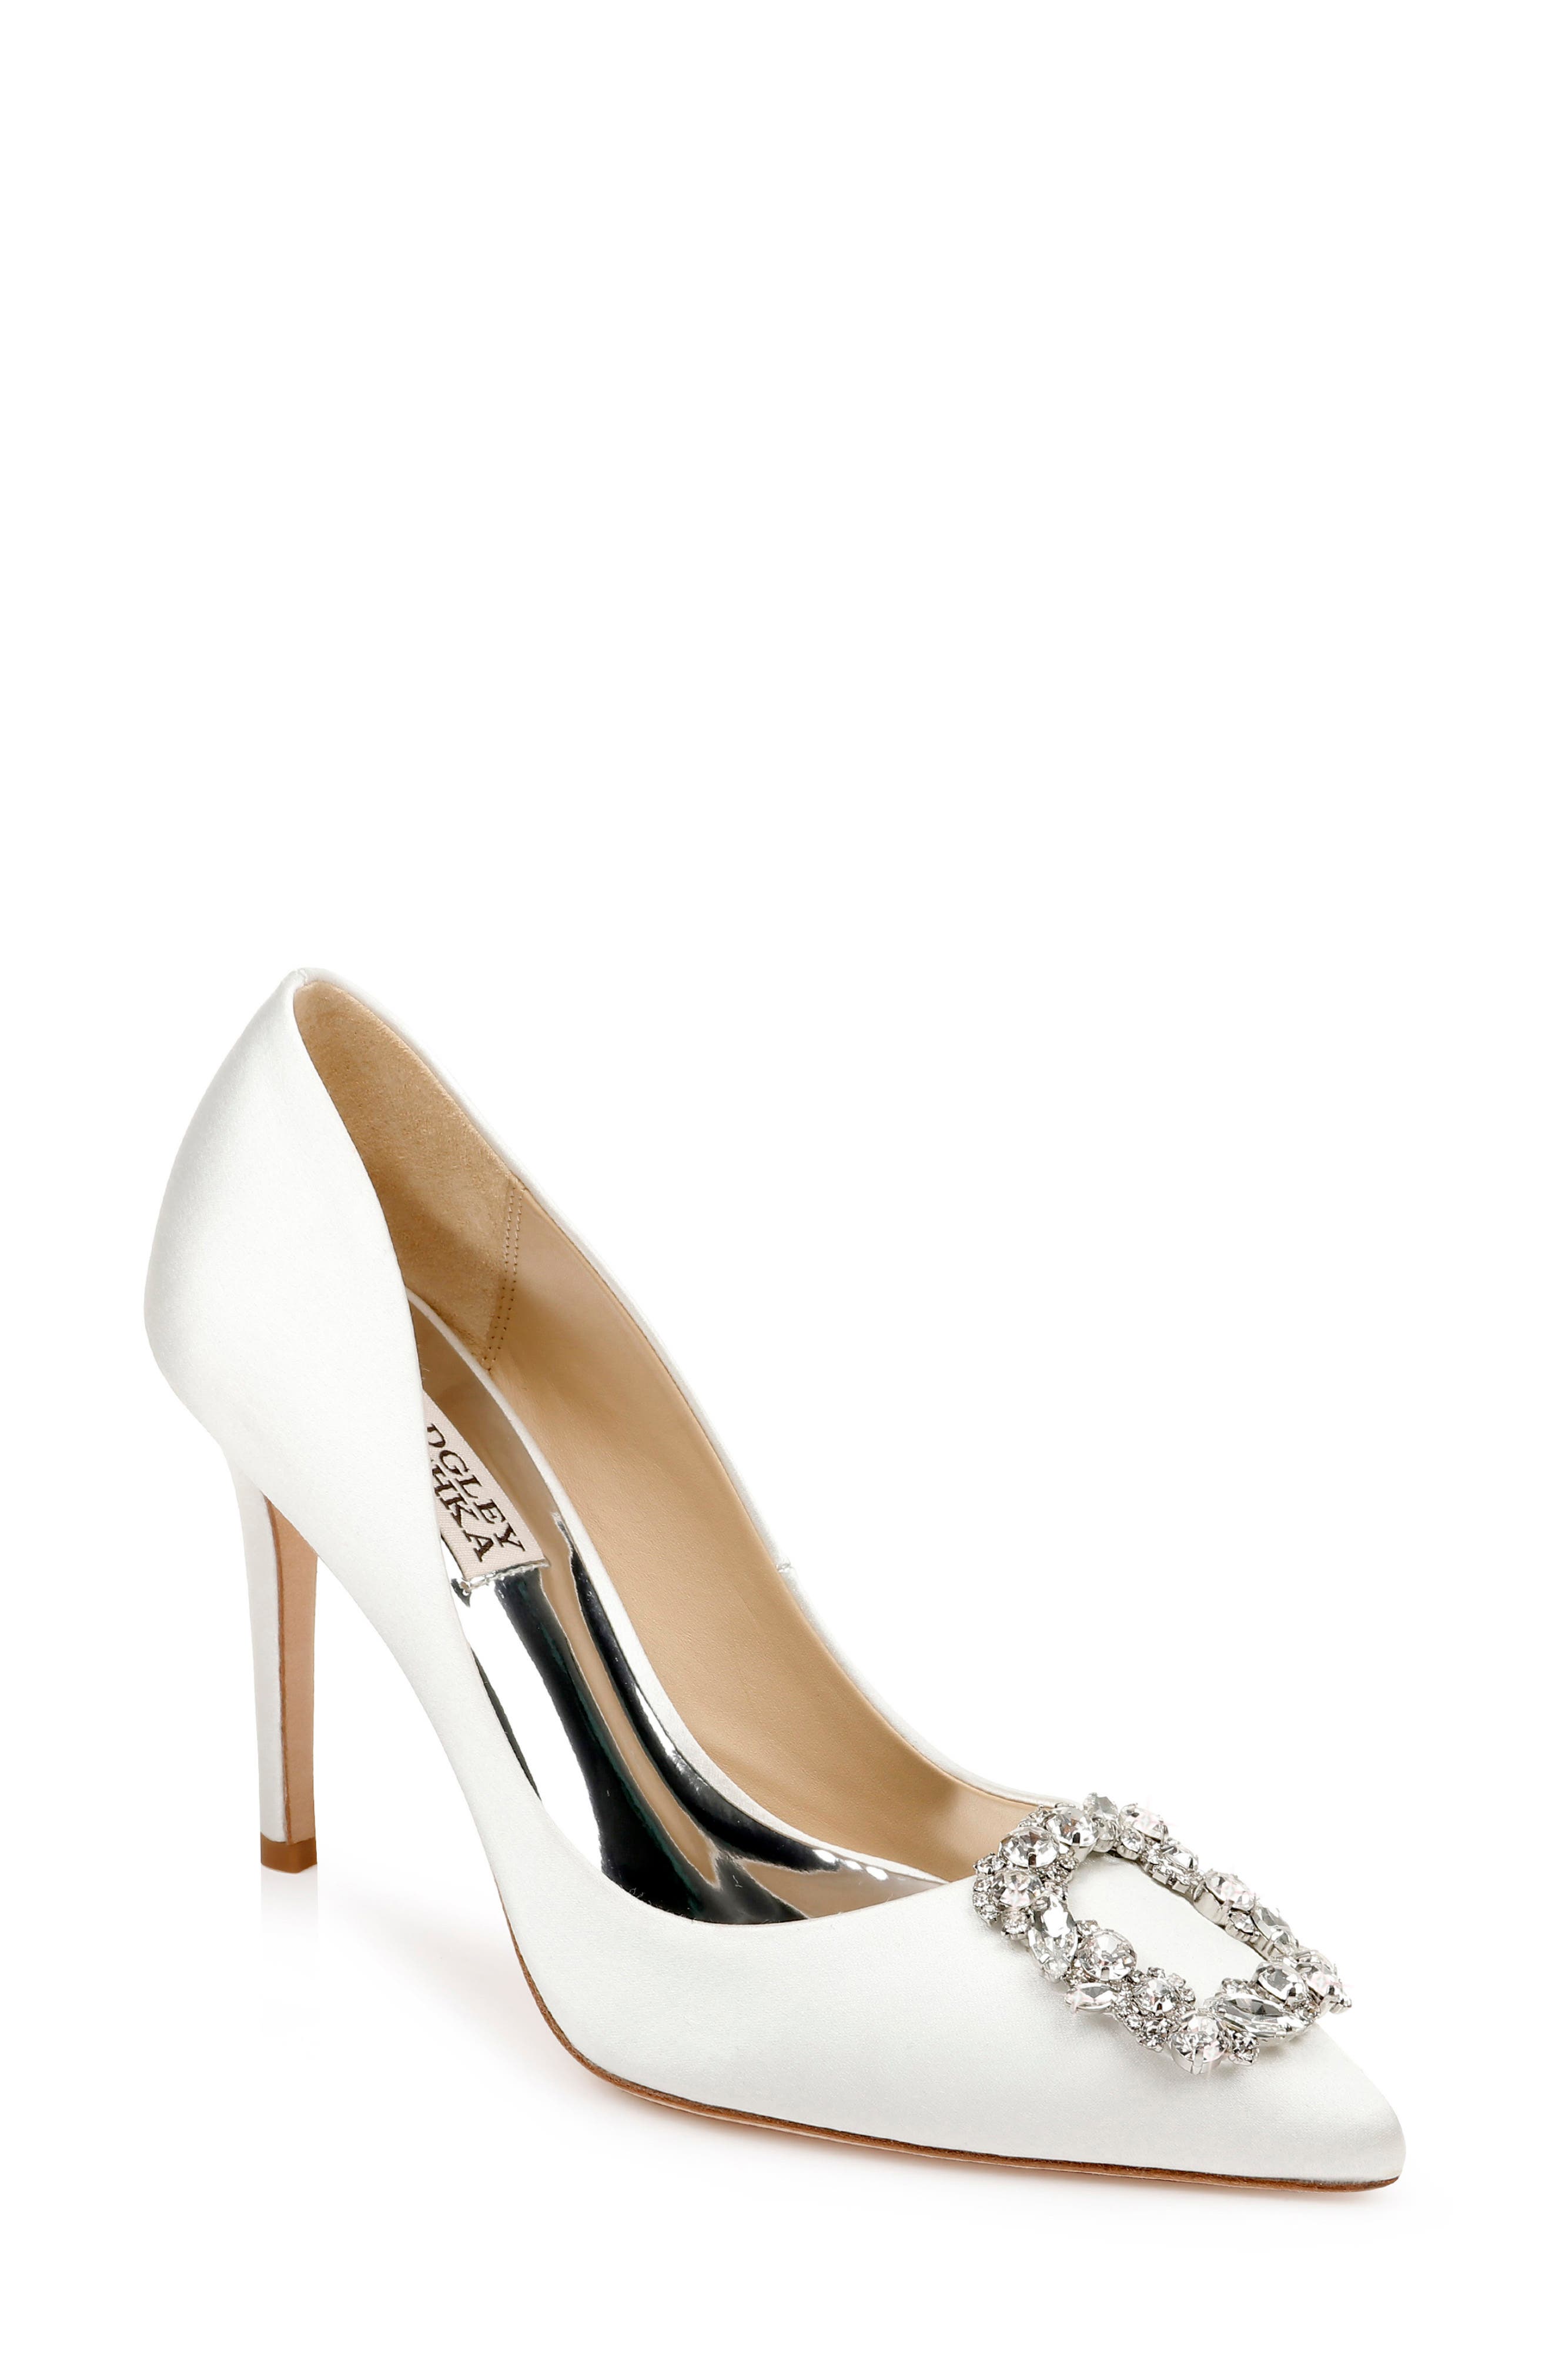 Badgley Mischka Collection Cher Crystal Embellished Pump in Soft White Satin